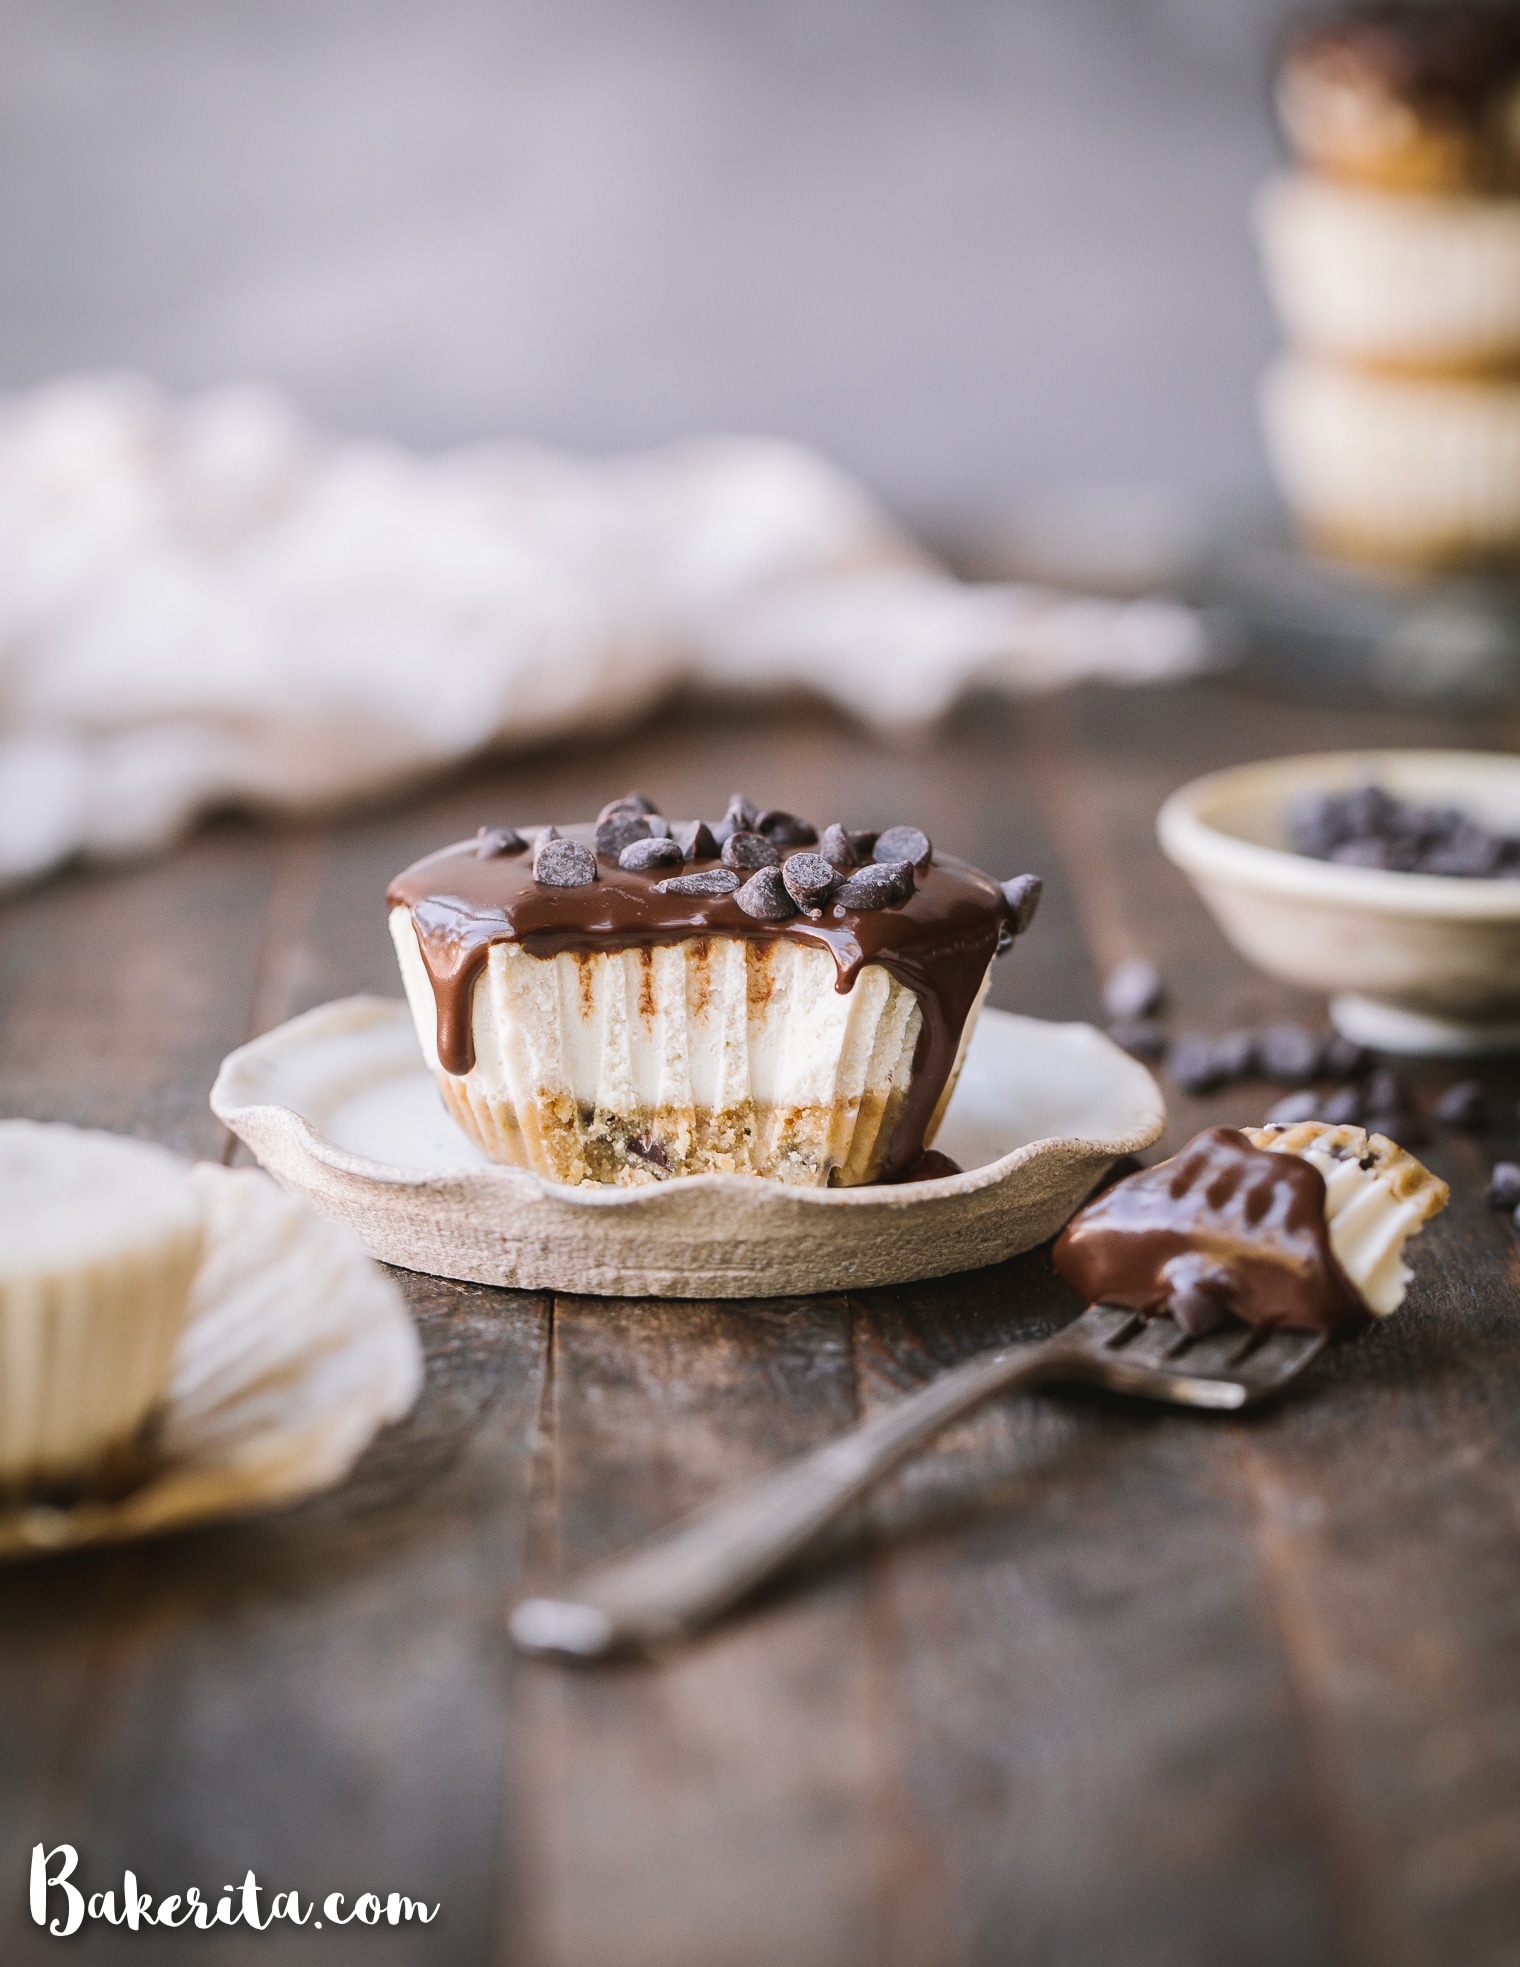 In these No-Bake Vegan Chocolate Chip Cookie Dough Cheesecakes, vanilla cashew cheesecake tops a gluten-free & paleo chocolate chip cookie dough crust. Topped with dark chocolate ganache, these mini cheesecakes make a decadent treat you'll make again and again!